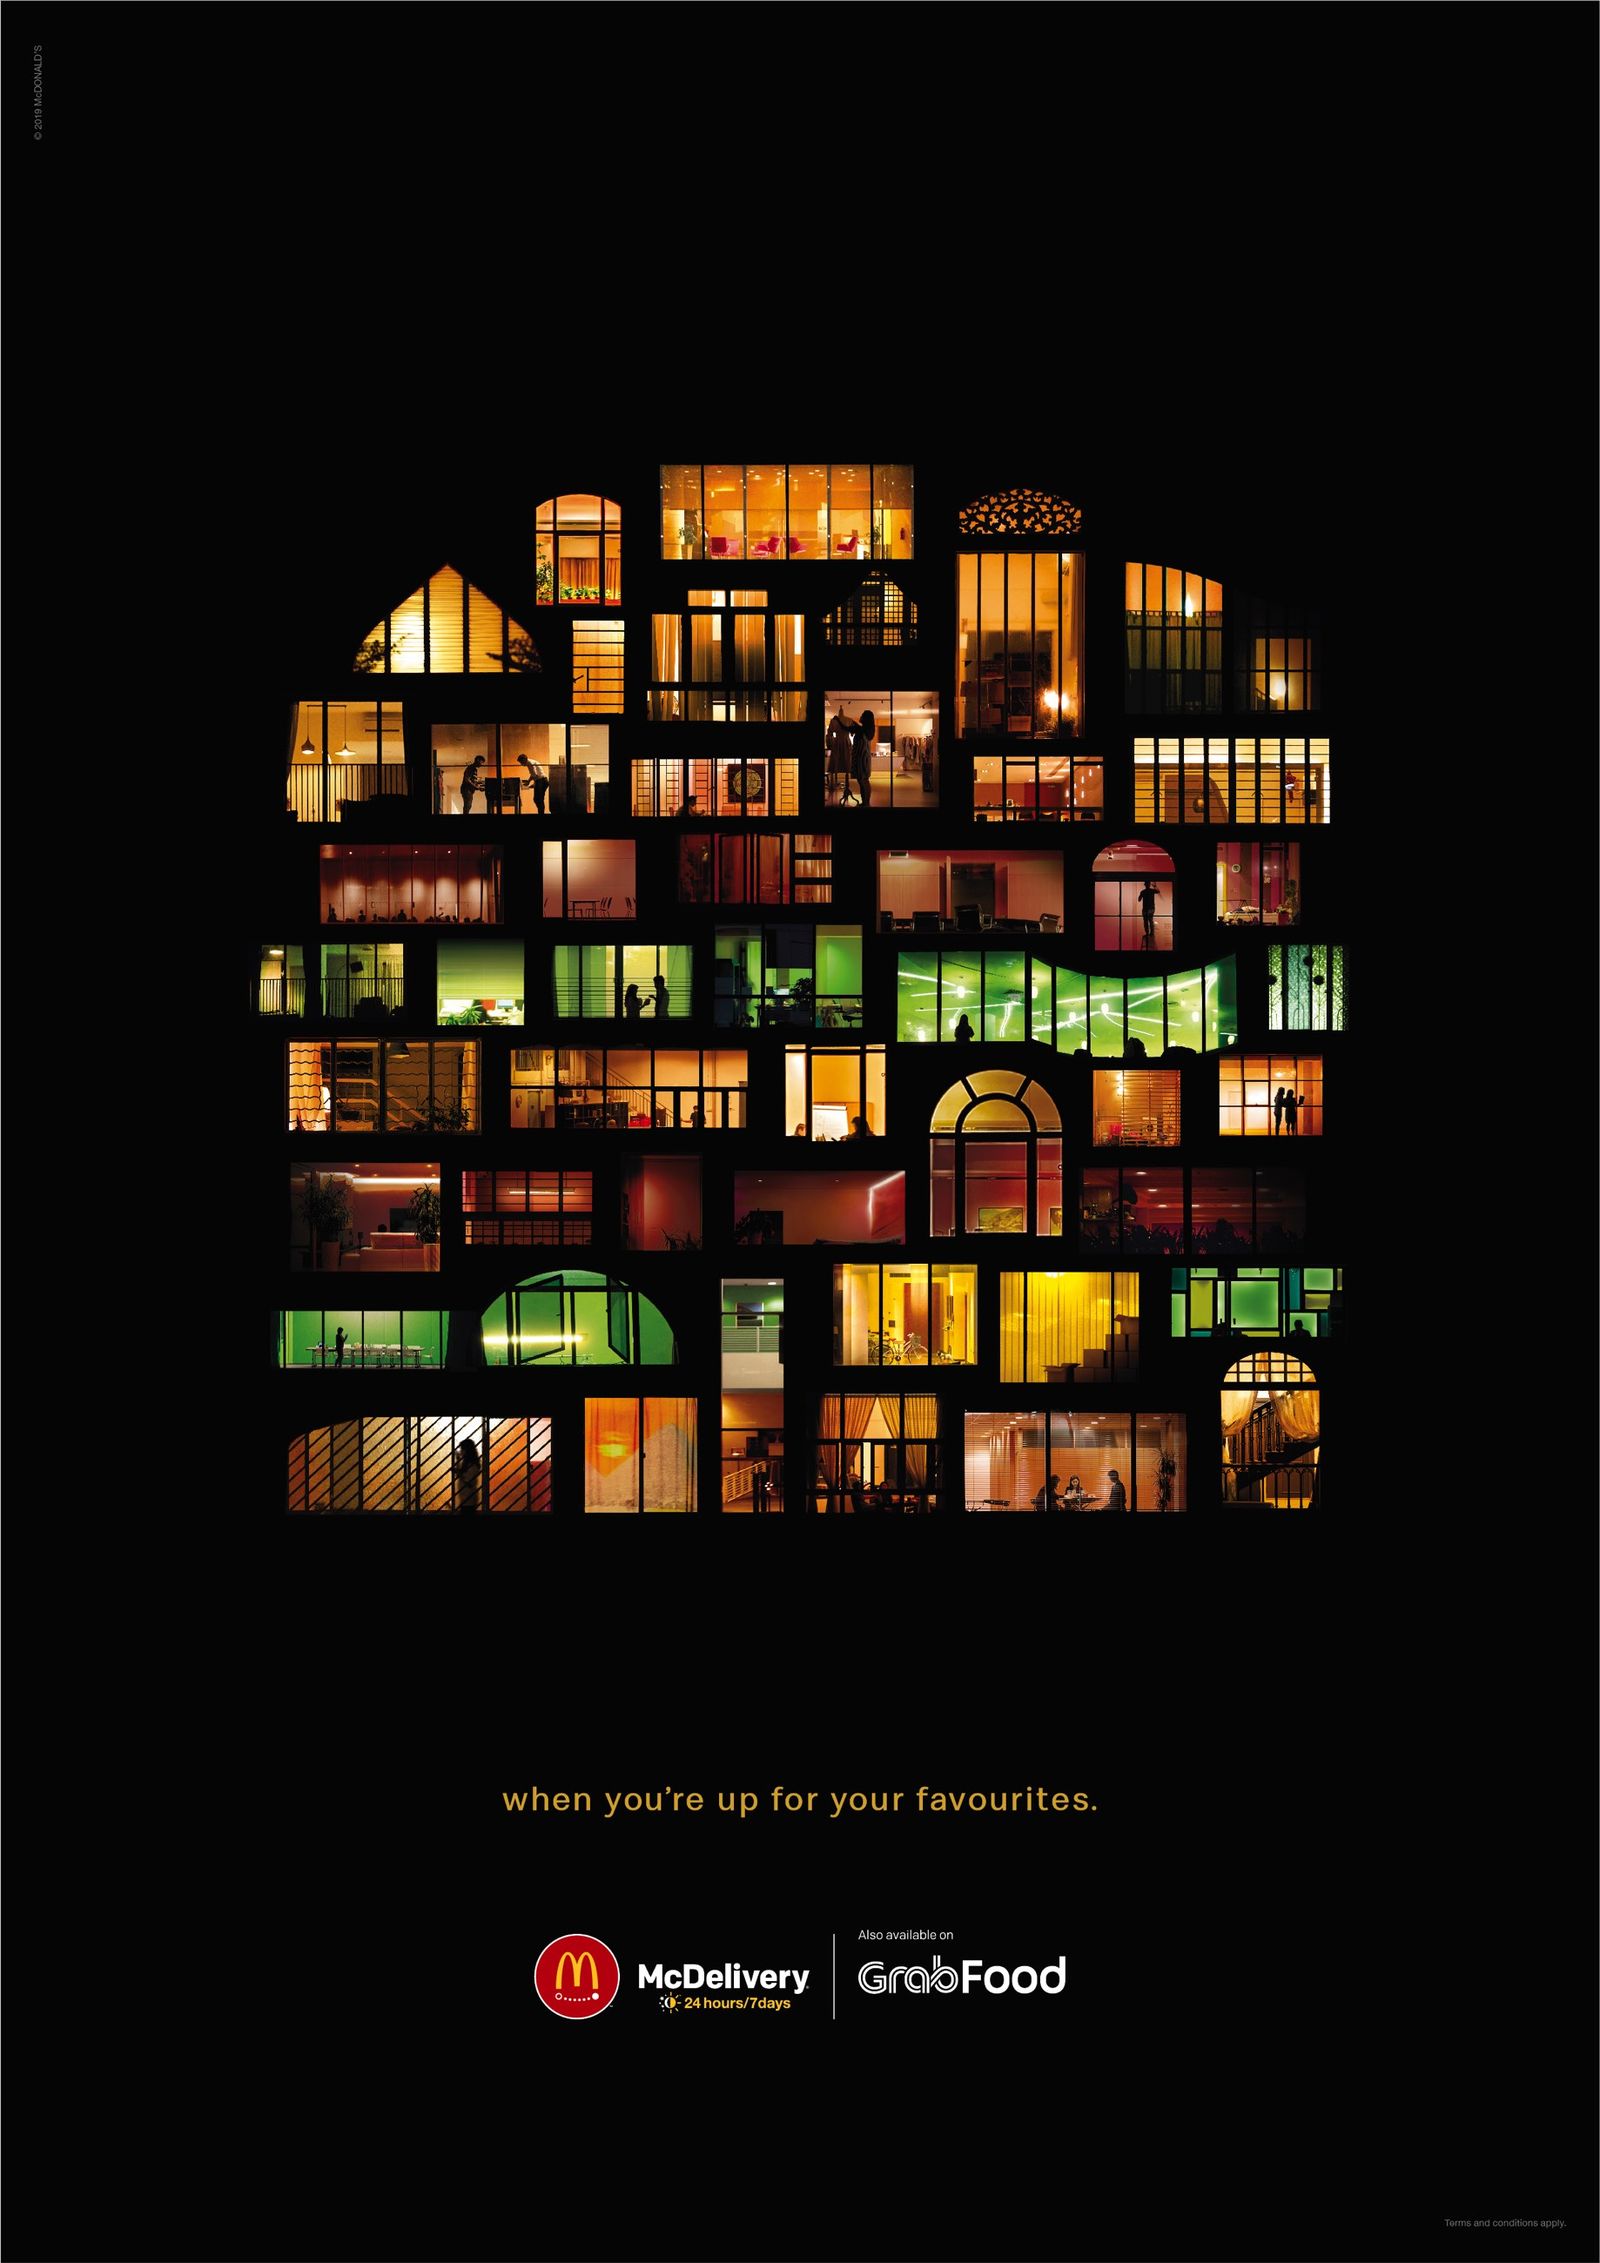 McDonald's: "when you're up for your favorites." by DDB ...